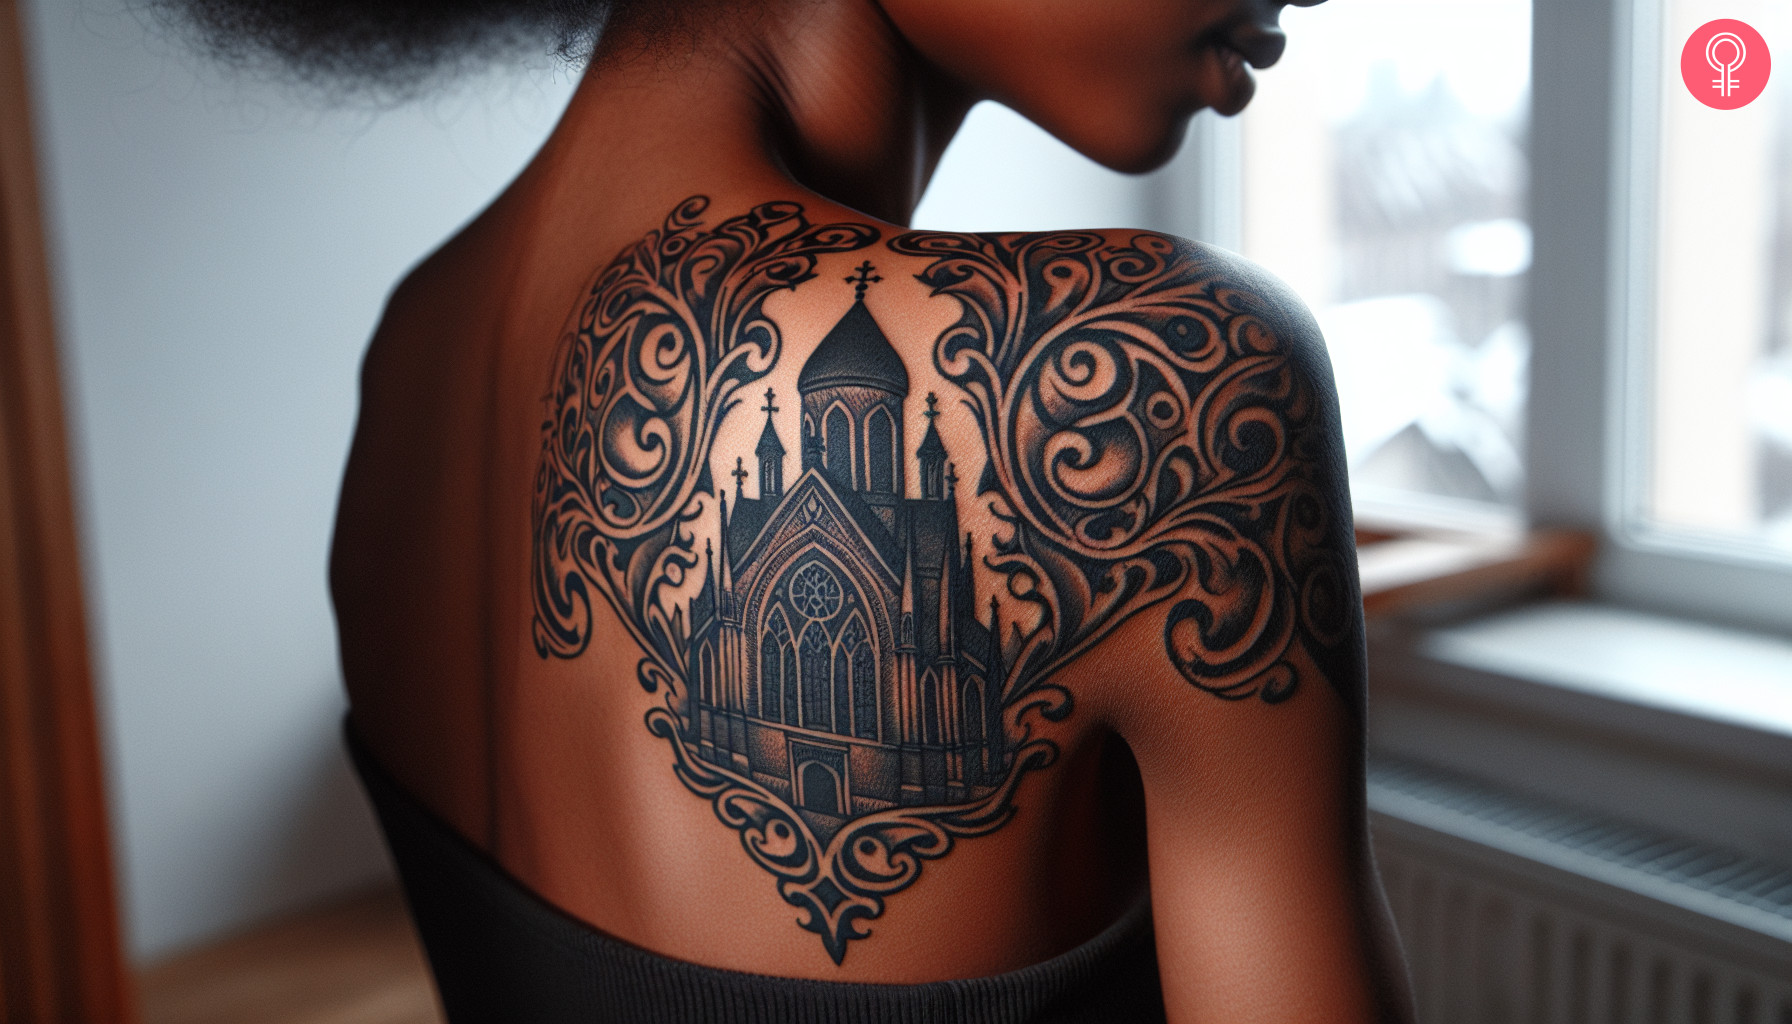 A traditional cathedral tattoo on the forearm